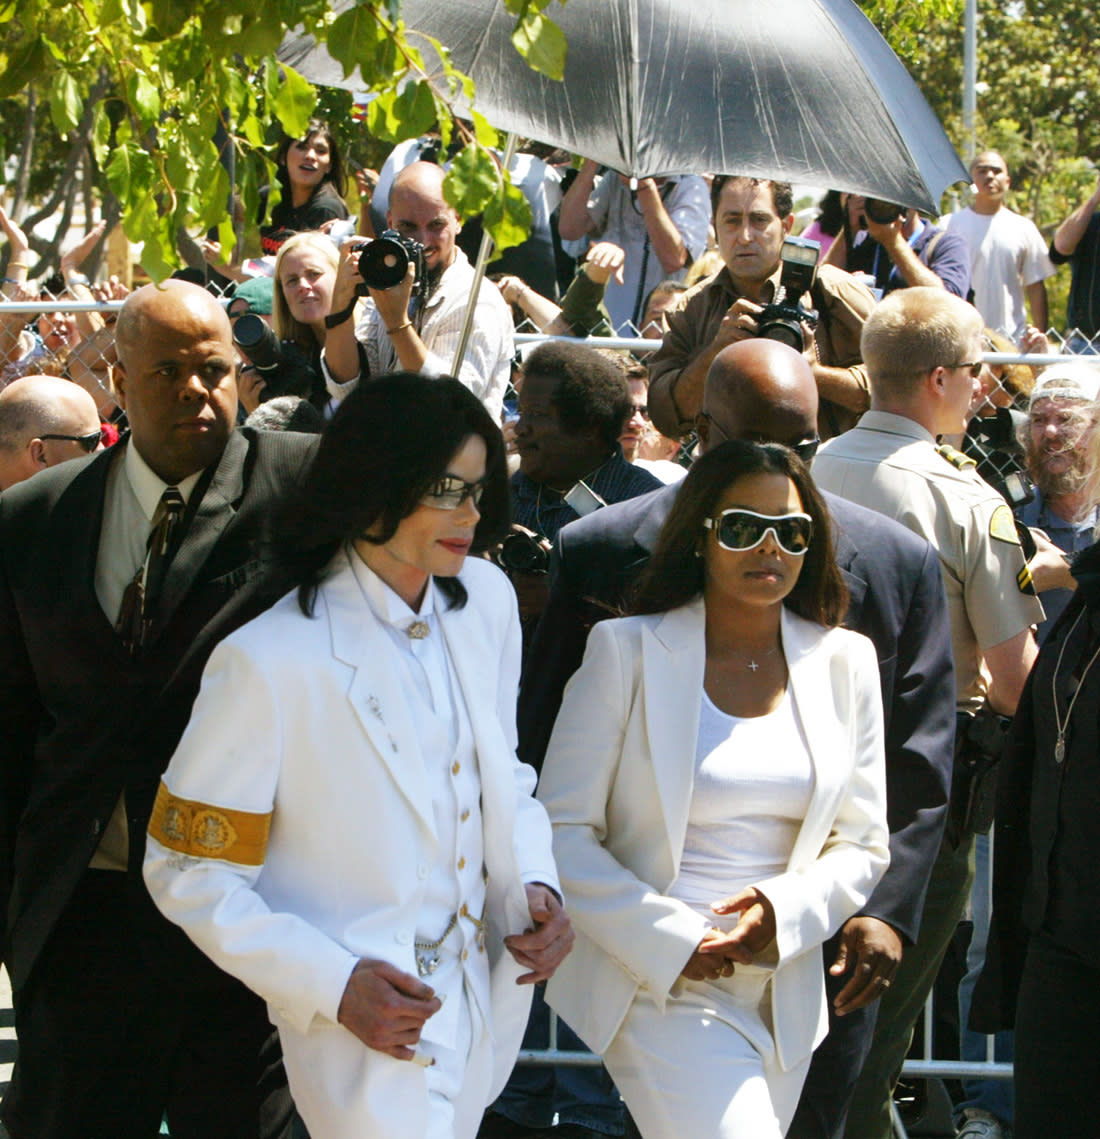 Singer Michael Jackson (L) and sister Janet Jackson walk back to courthouse after greeting fans during a lunch break at a pretrial hearing in Santa Maria, California August 16, 2004. Santa Barbara county district attorney Thomas Sneddon has been subpoenaed by Jackson's lawyers to testify during the pretrial hearing on the probe of Bradley Miller, a private investigator with ties to Jackson, whose office was searched by law enforcement officers in November 2003.  (Photo by Spencer Weiner/Los Angeles Times via Getty Images)